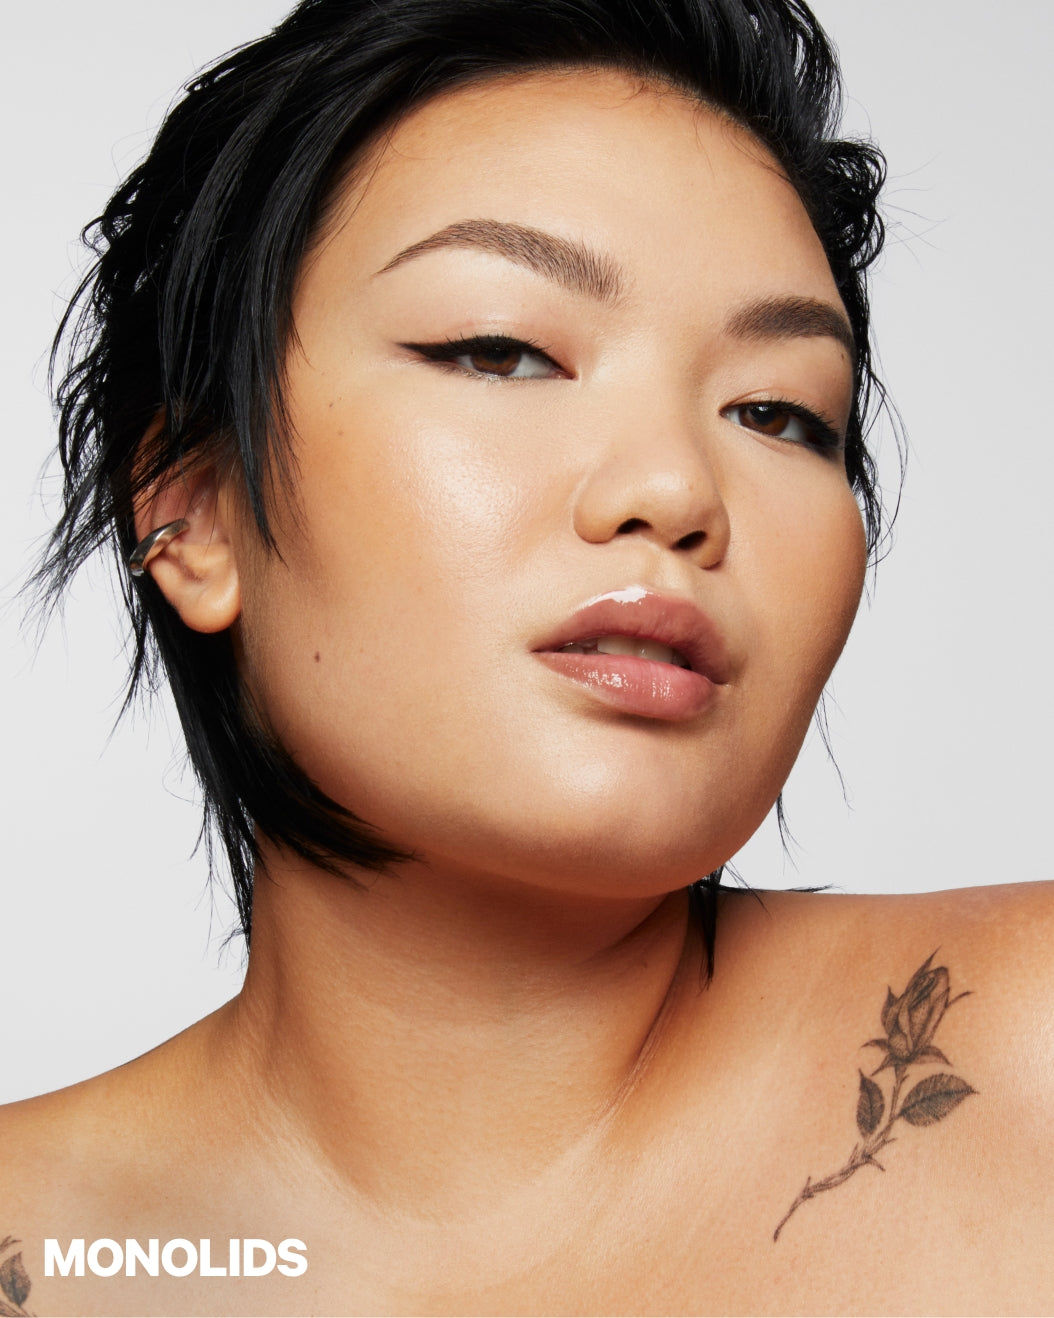 Model with monolids wears winged eyeliner on a white background